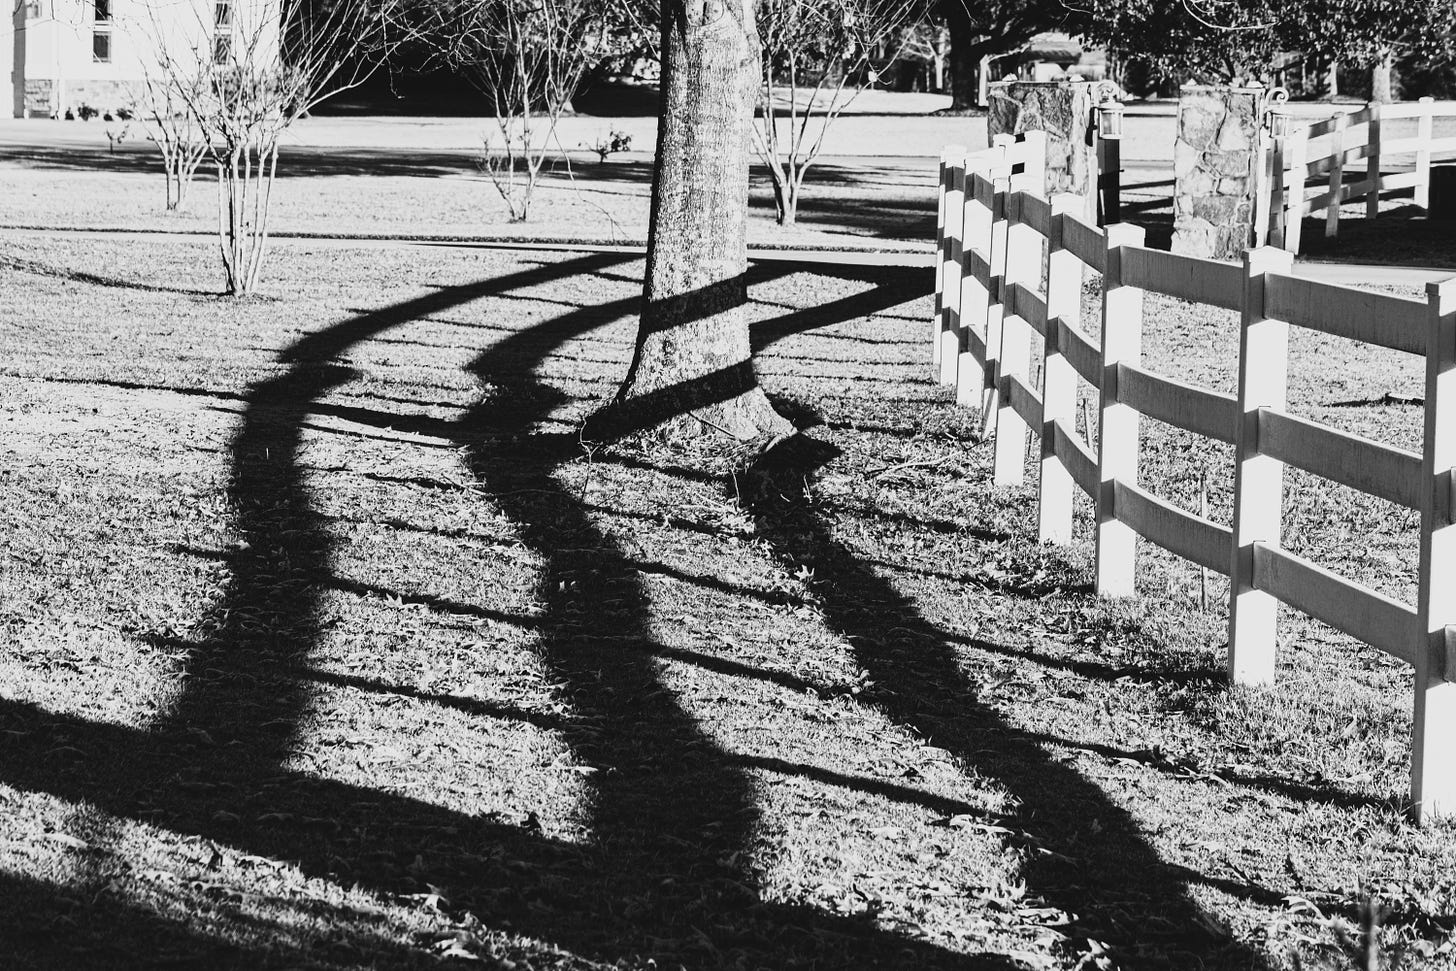 black and white photo of a white fence and the trunk of an oak tree with the shadow of the fence cutting across the lawn and around the tree